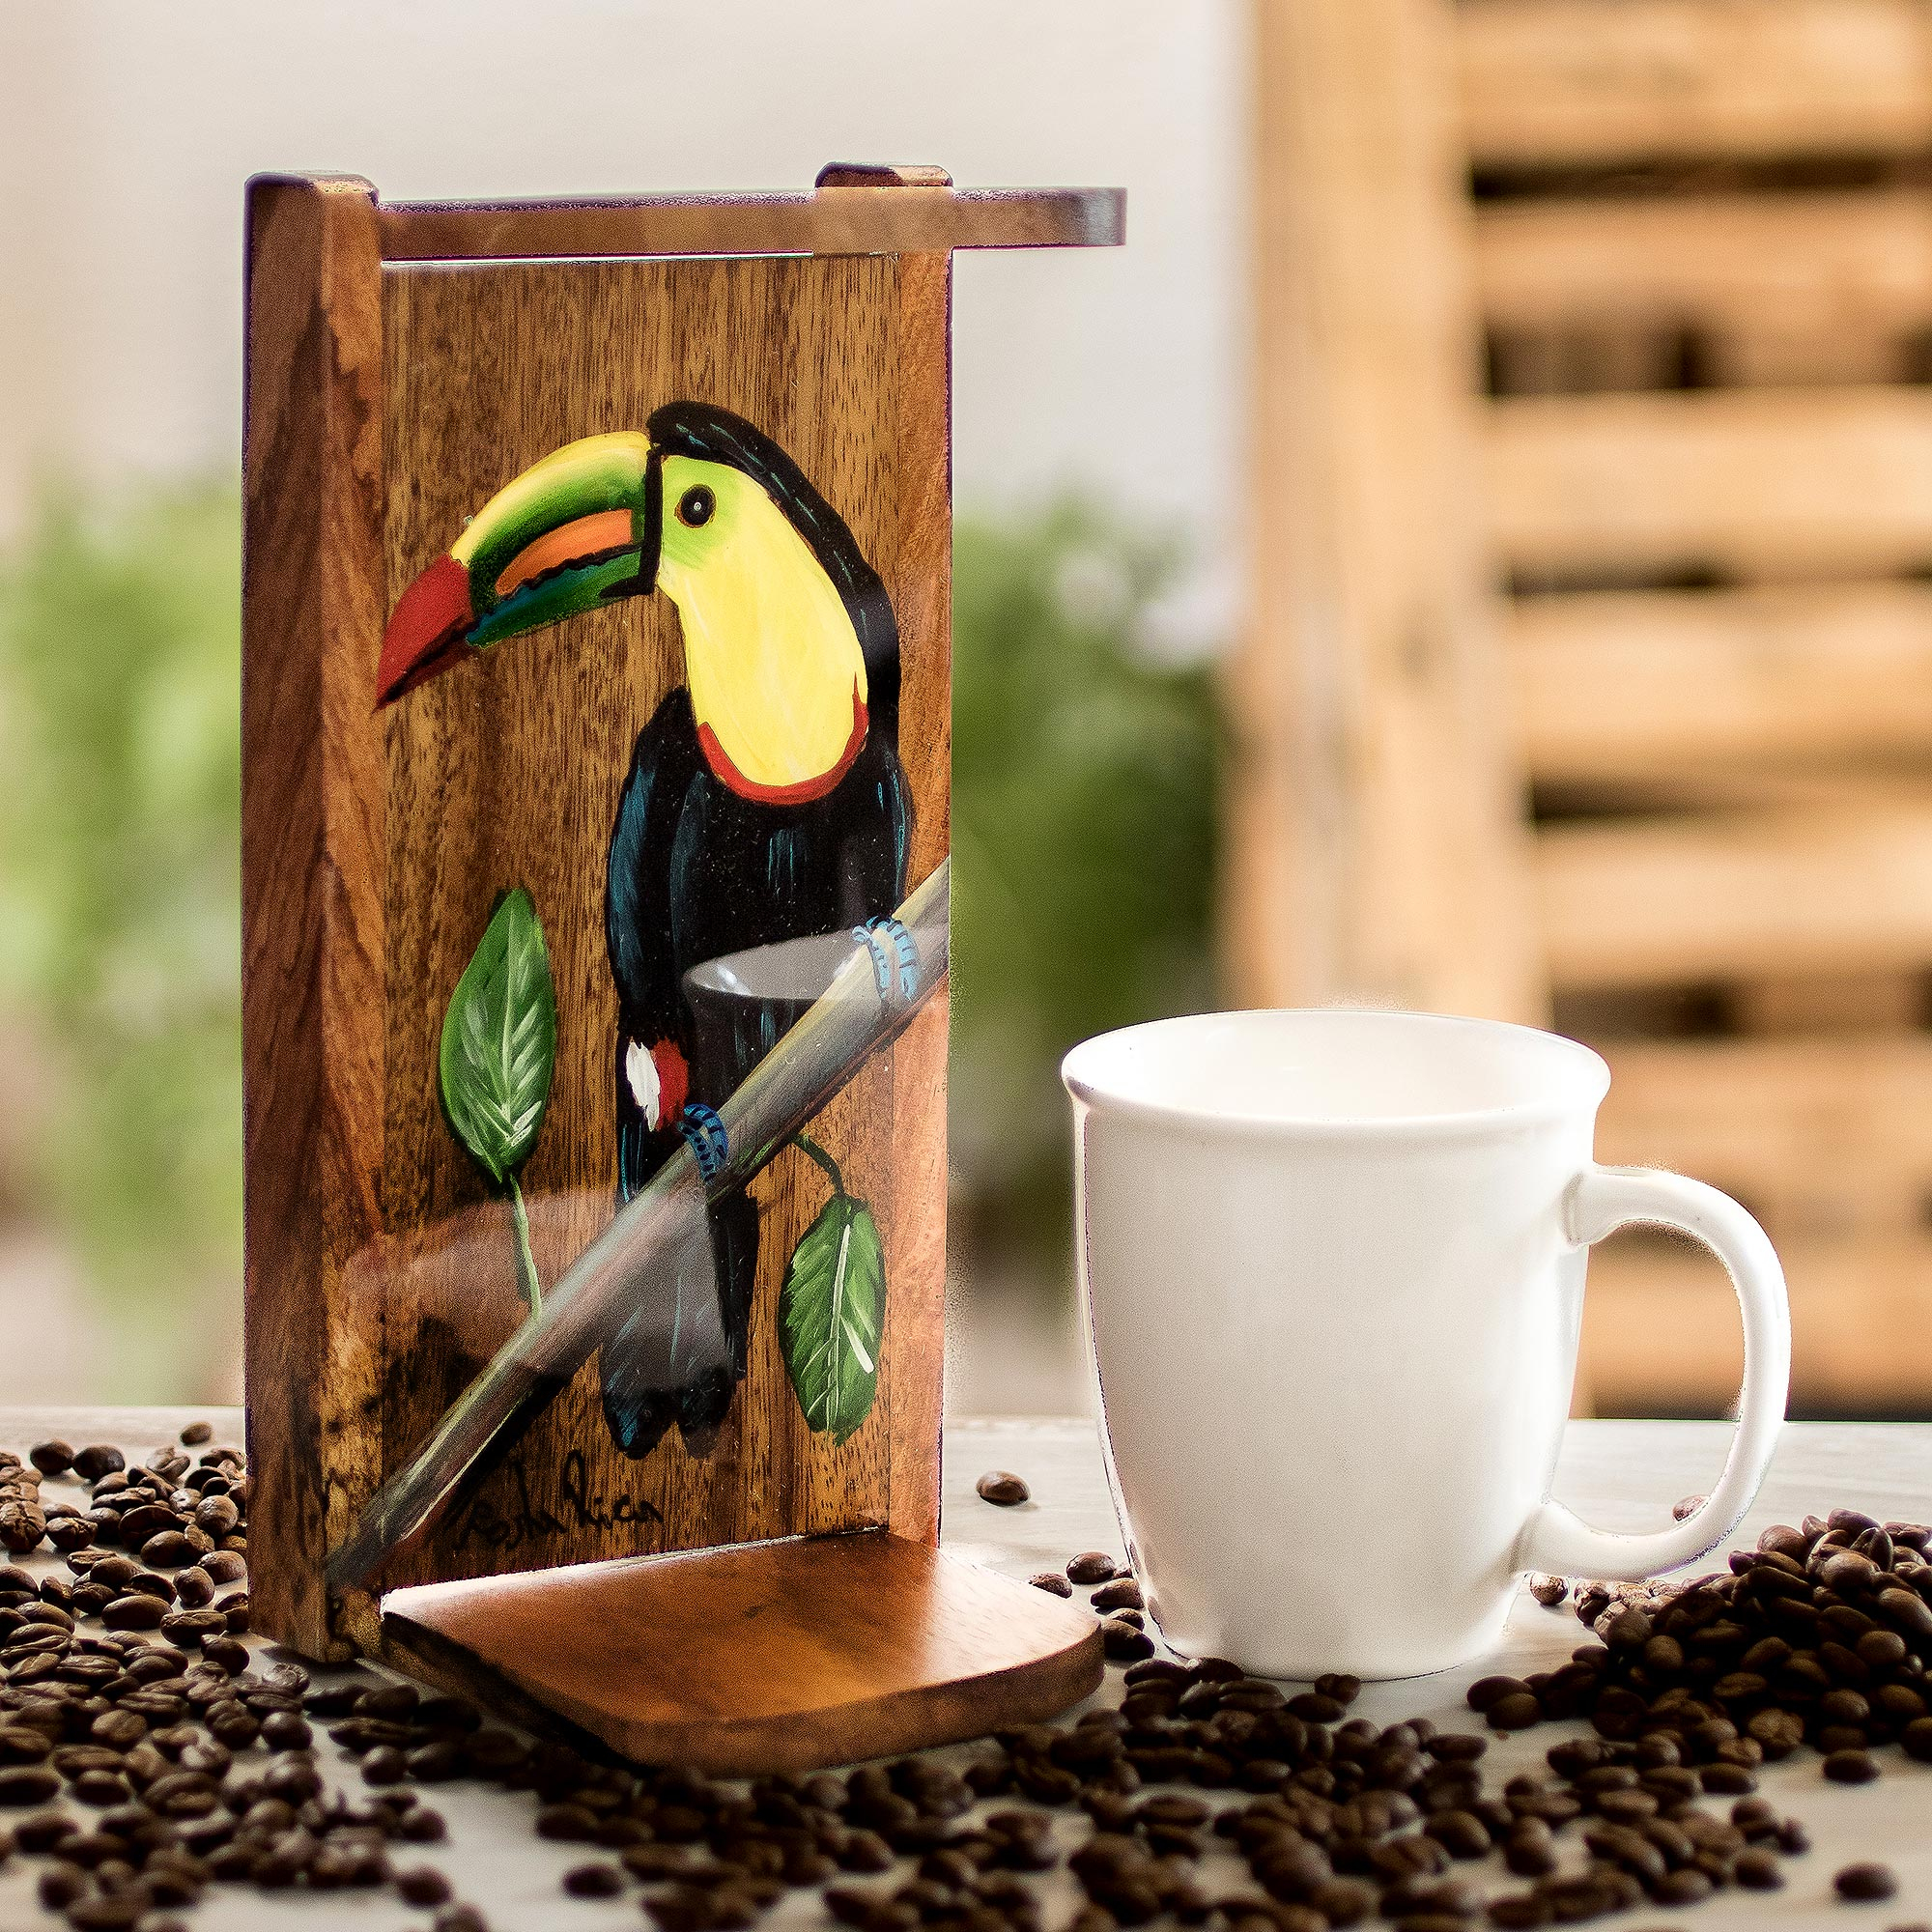 Drip Coffee Maker with a Toucan from Costa Rica, 'Toucan Make Coffee